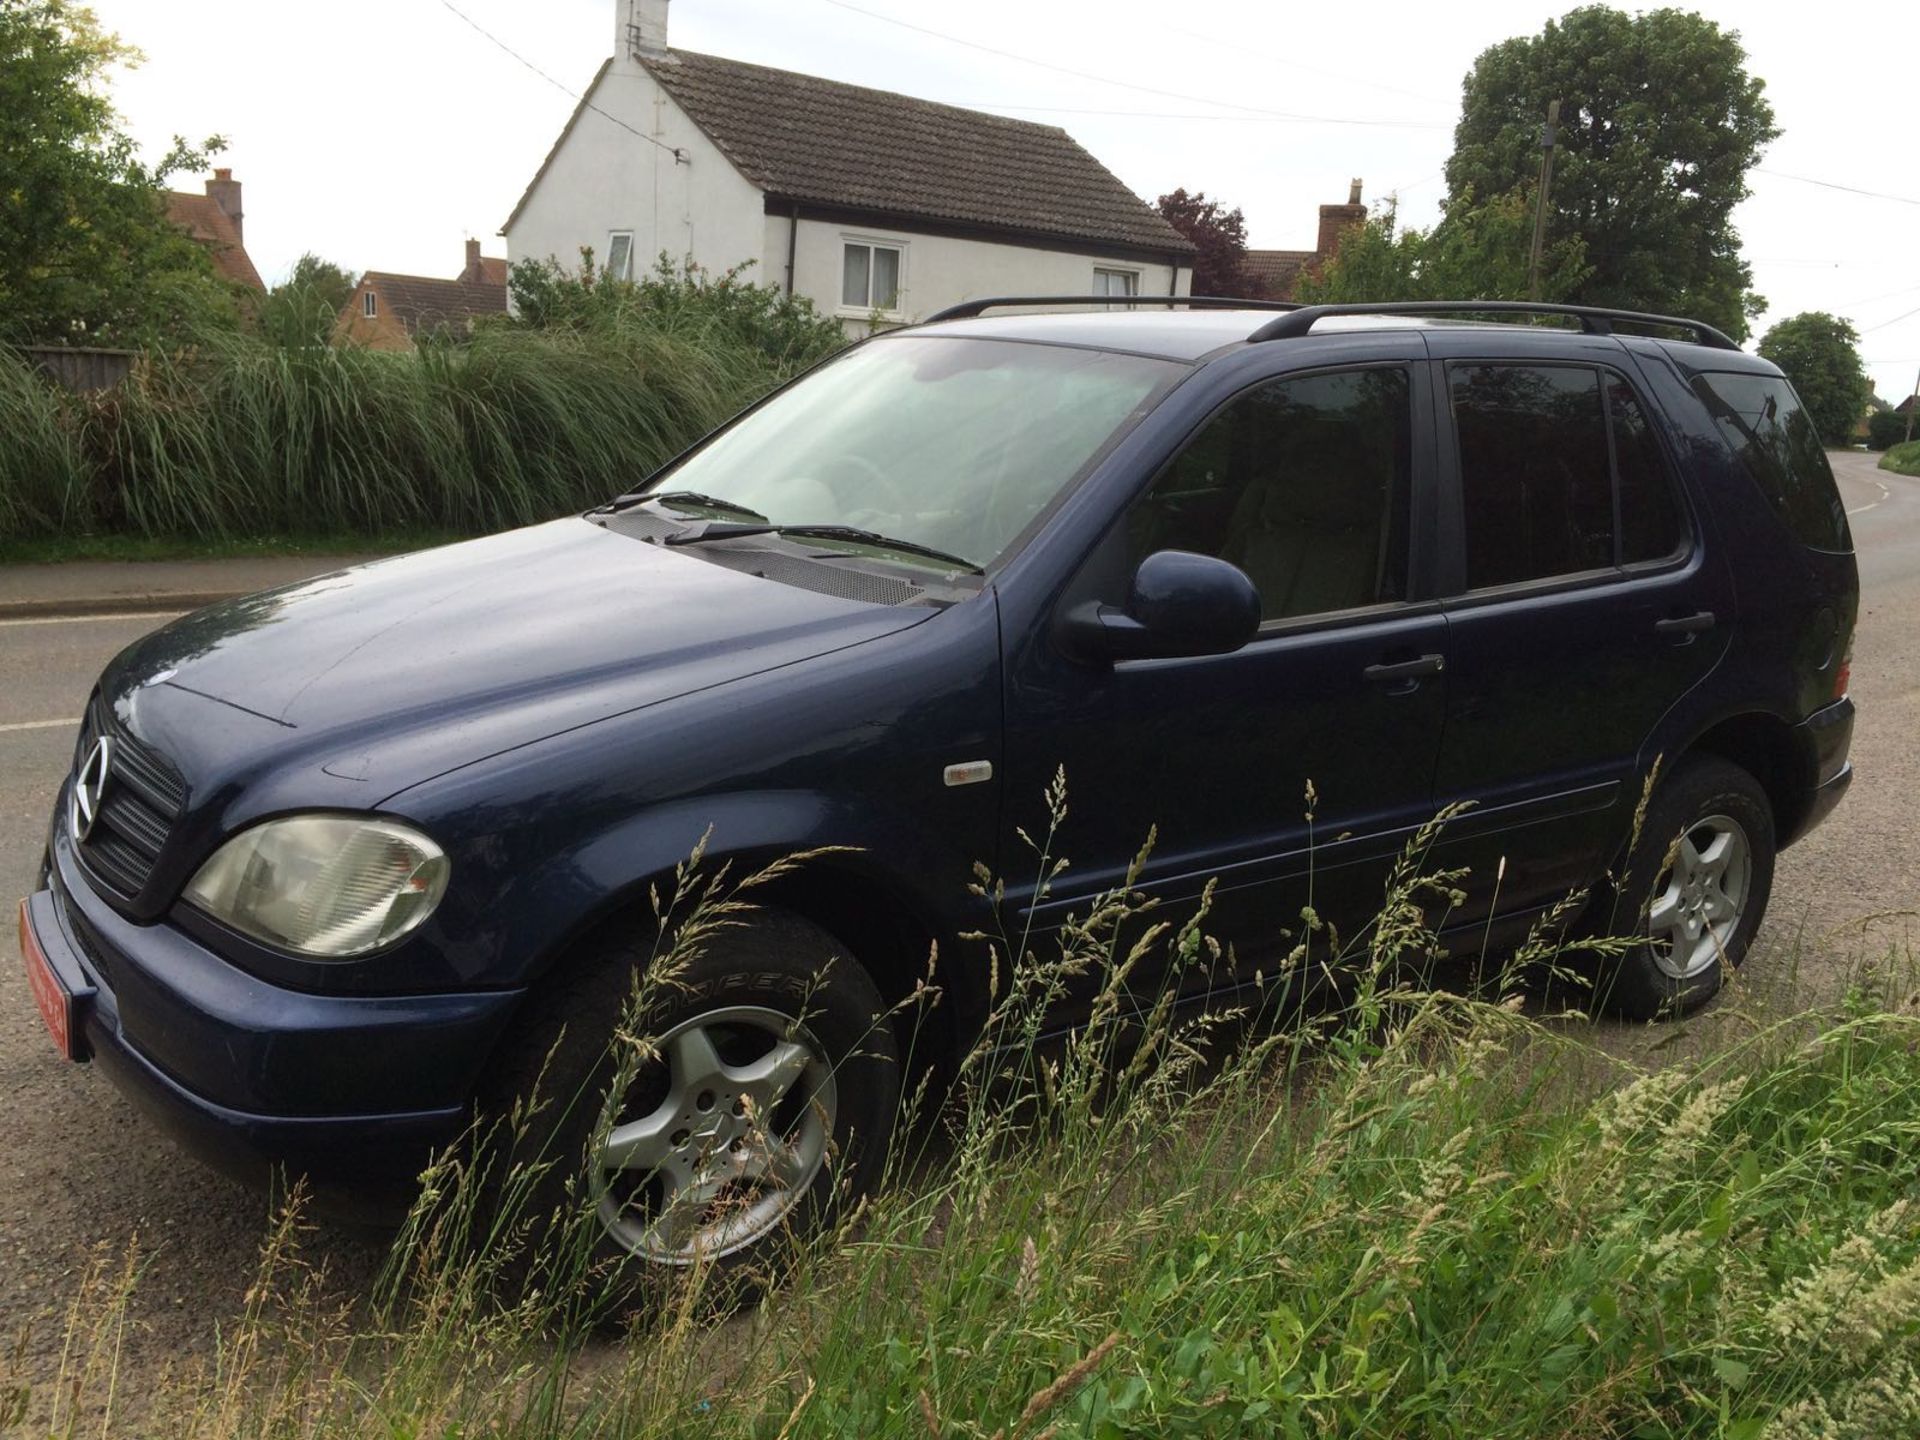 2000 MERCEDES BENZ ML270 CDI AUTO (7 SEATER) **NO VAT ON HAMMER PRICE** - Image 8 of 19